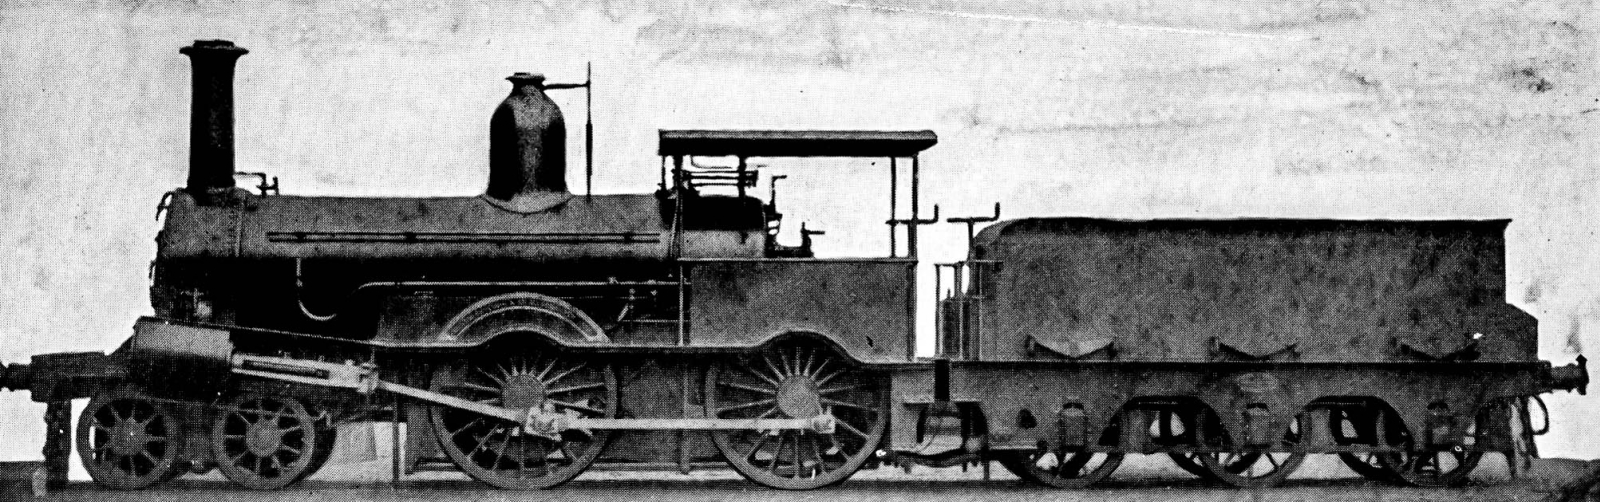 A locomotive of the C.79 class in its original condition